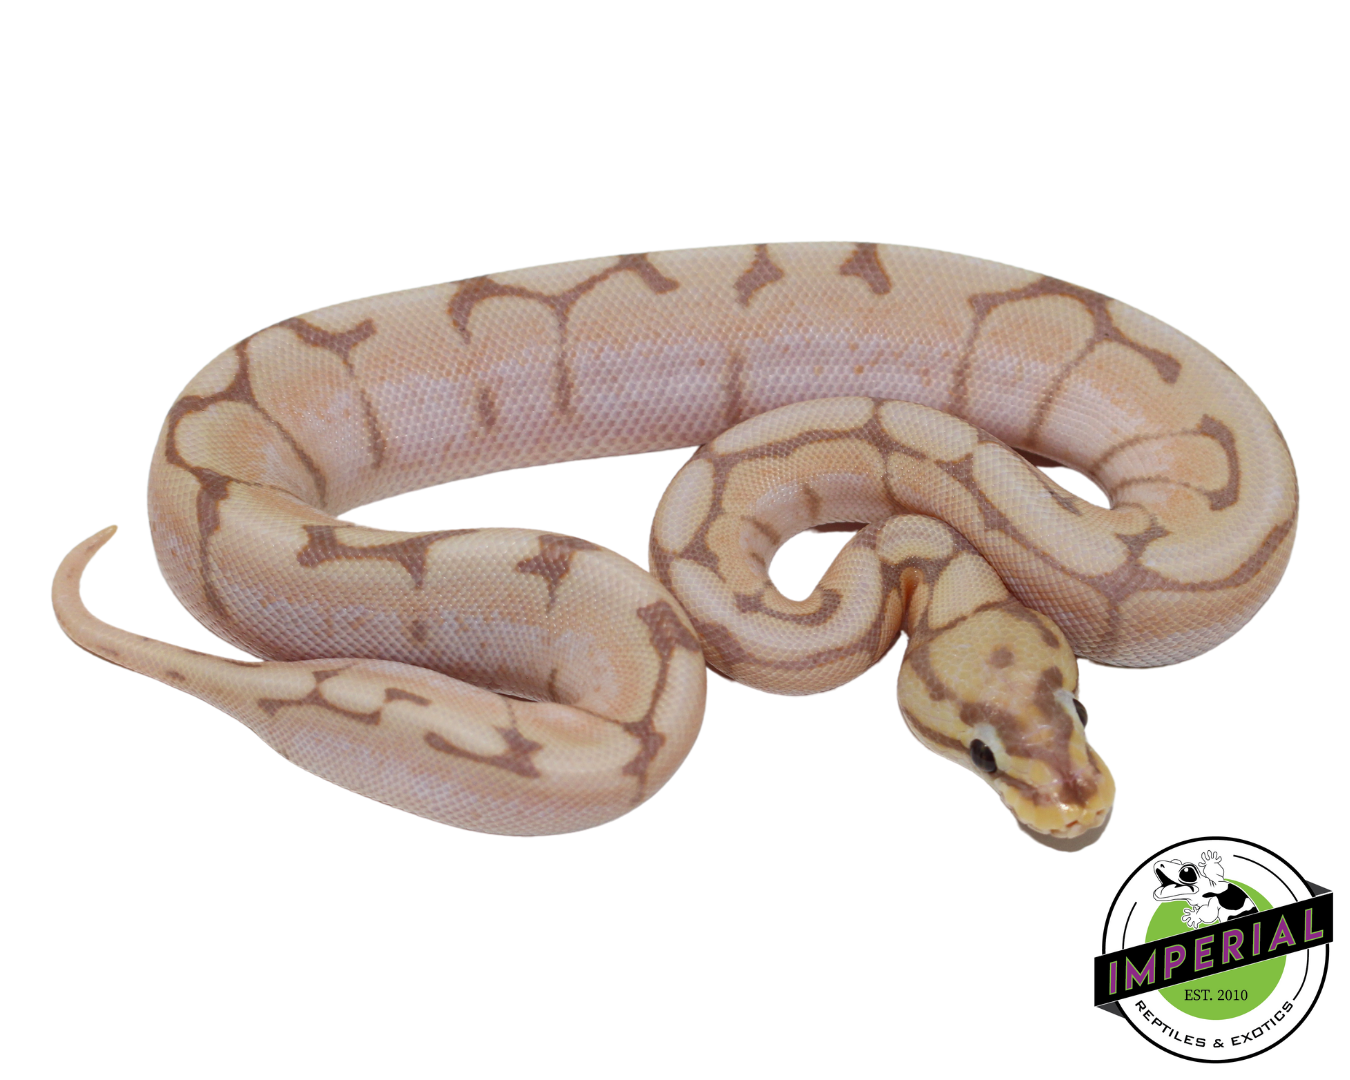 spider banana ball python for sale, reptiles for sale, buy animals online